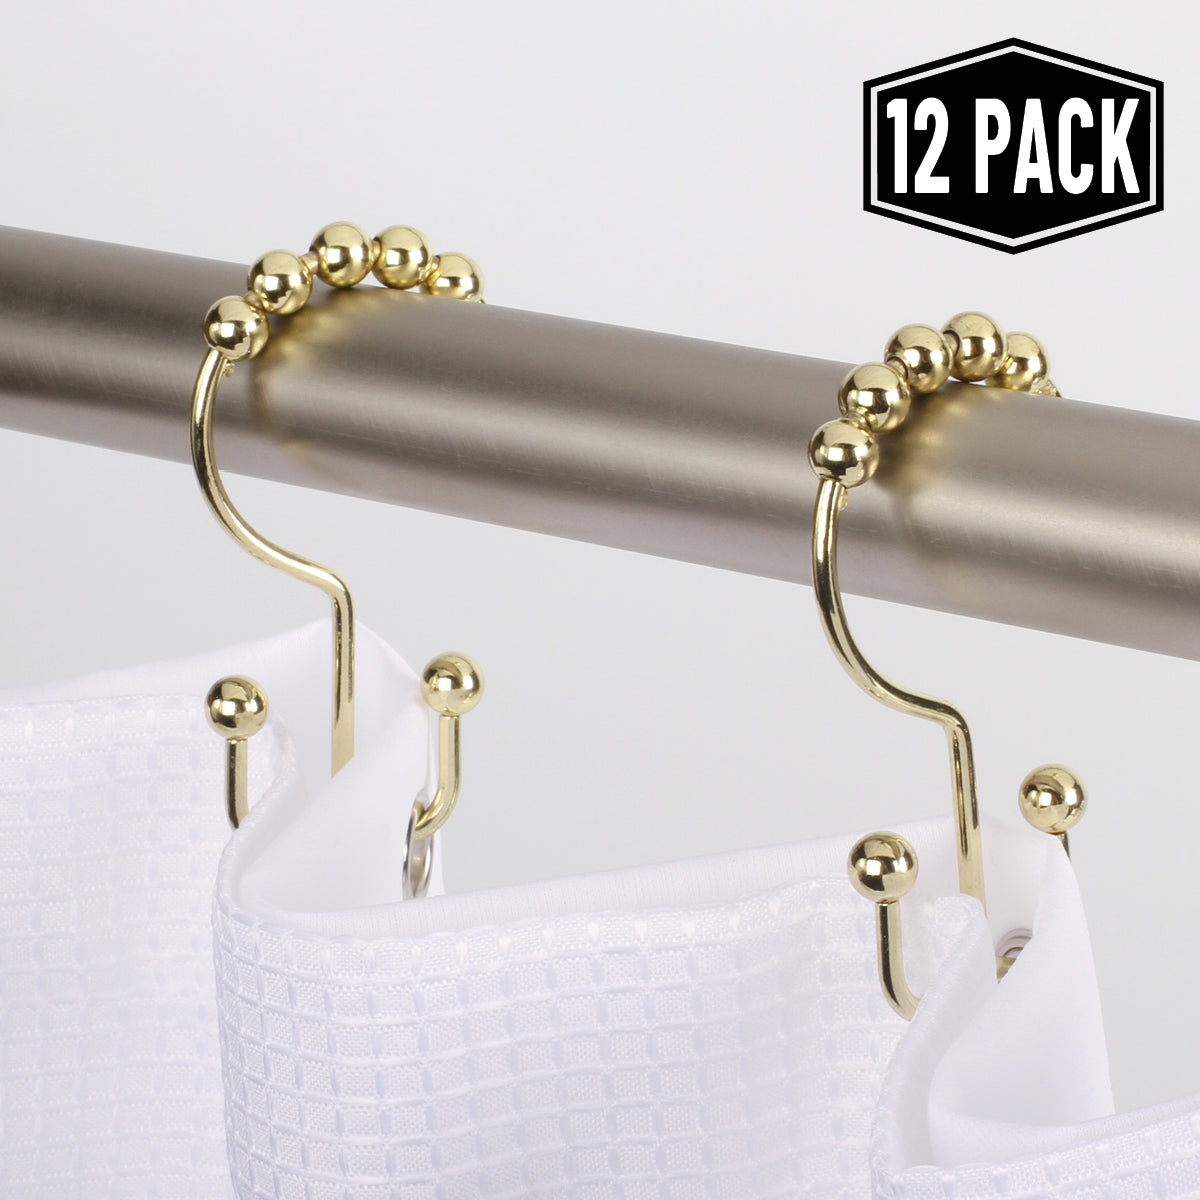 Gold Double Hook Shower Curtain Hooks Rings Set 12 Pack Stainless Steel